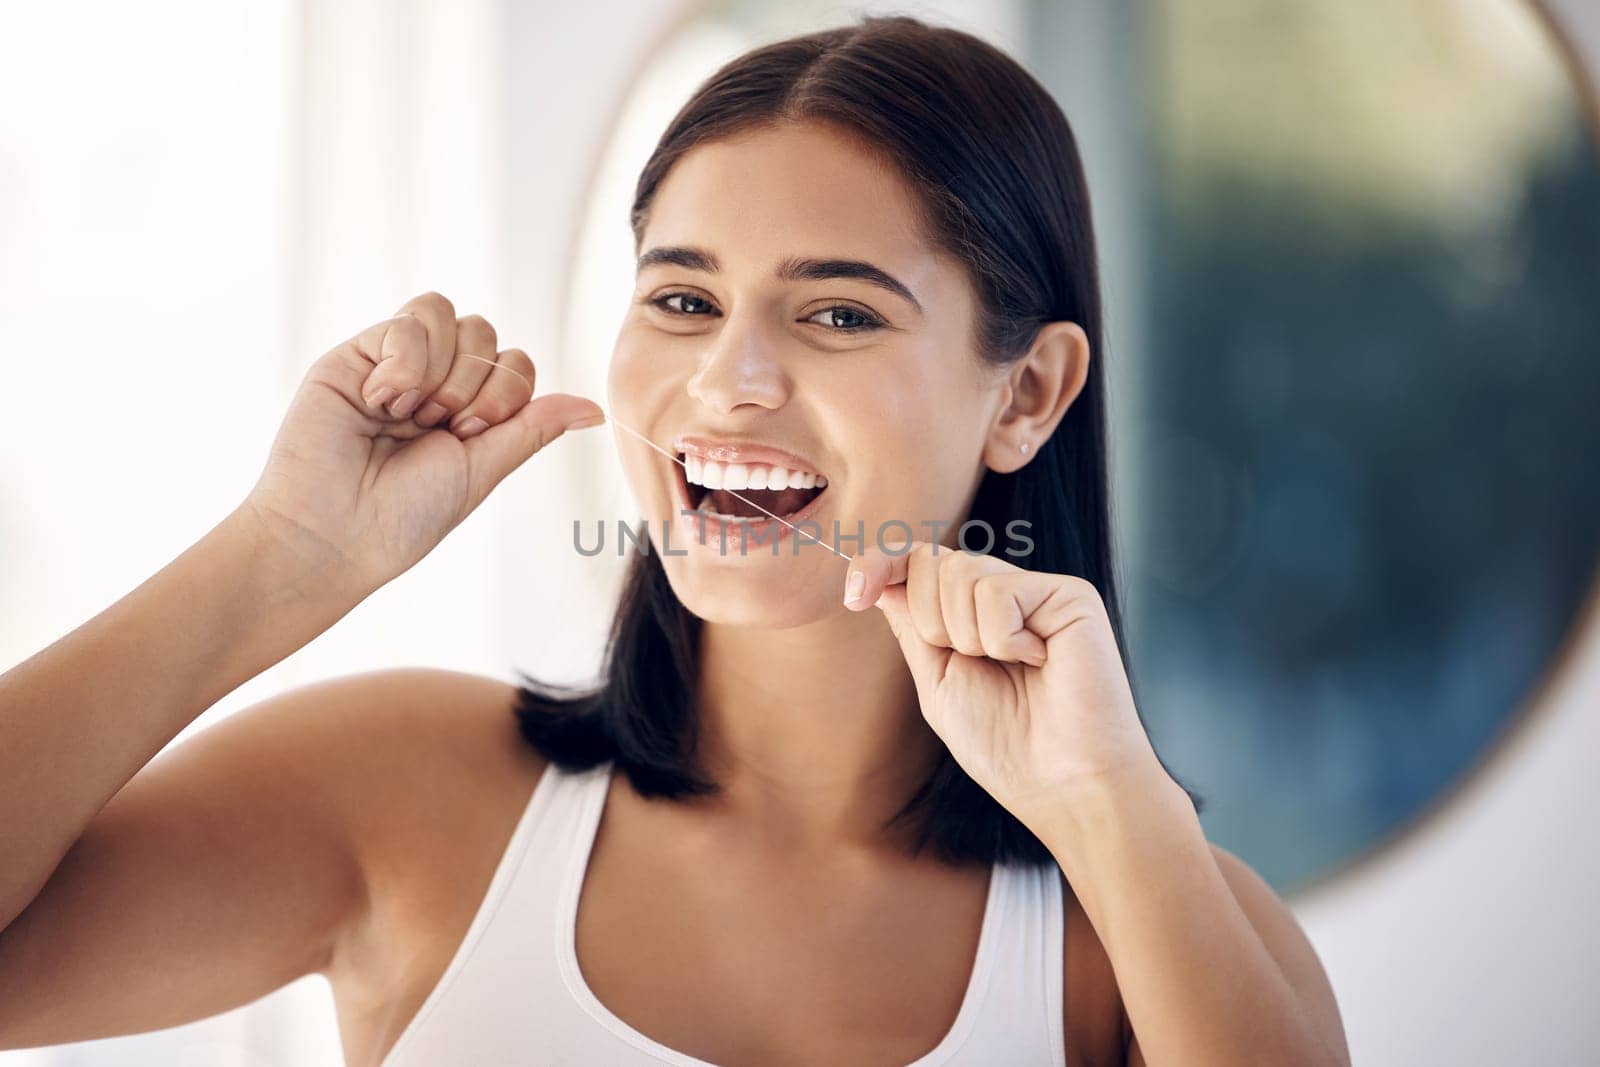 Smile, woman in bathroom flossing teeth and morning dental care routine in home mirror. Health, wellness and Indian woman with dental floss, motivation for cleaning for healthy mouth and fresh breath by YuriArcurs